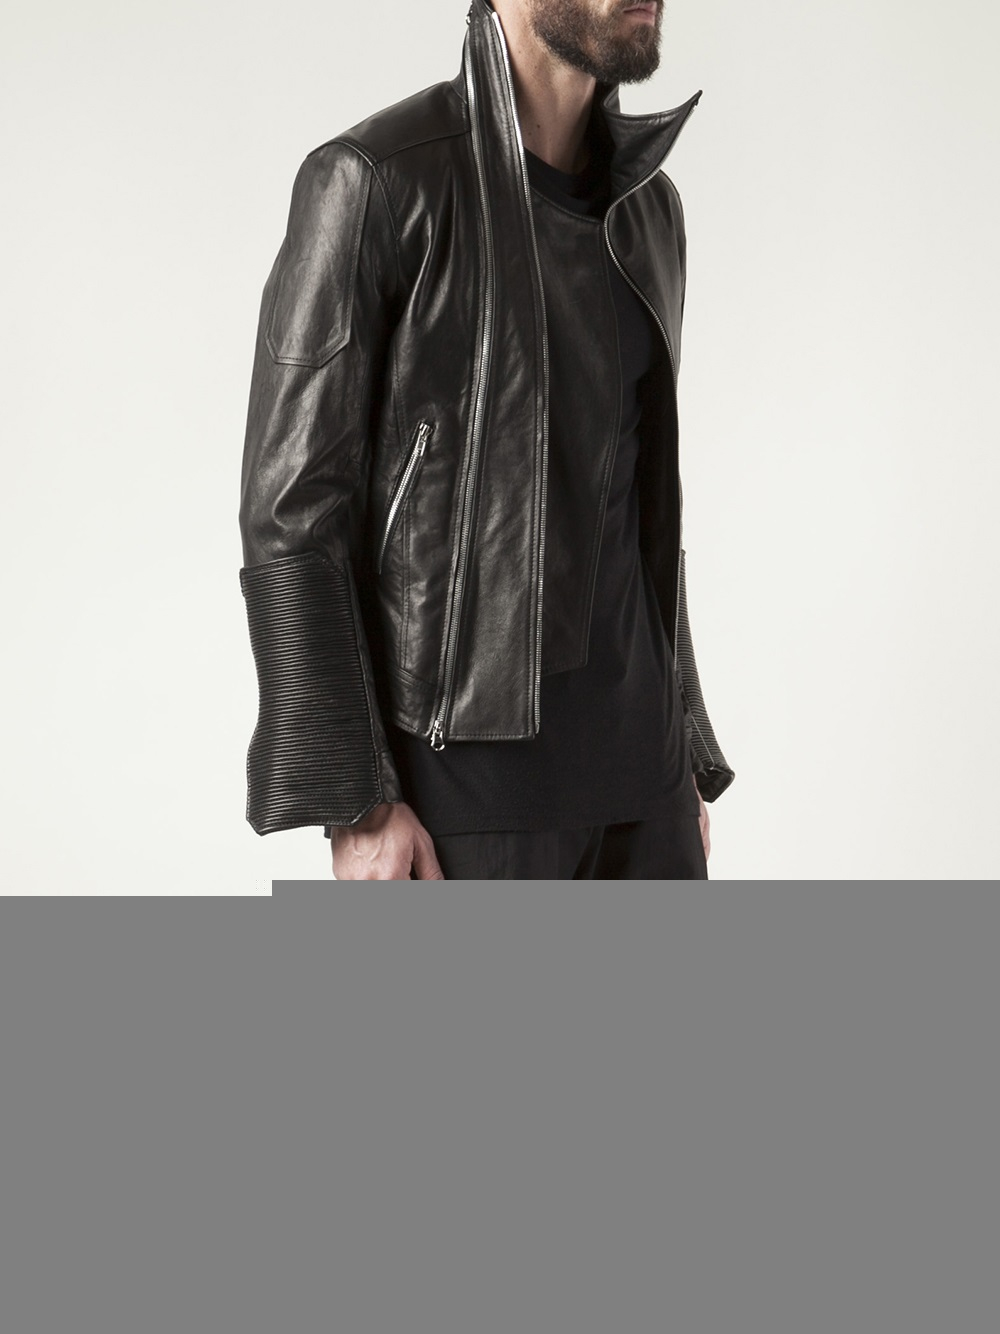 D.GNAK High Collar Leather Jacket in Black for Men - Lyst